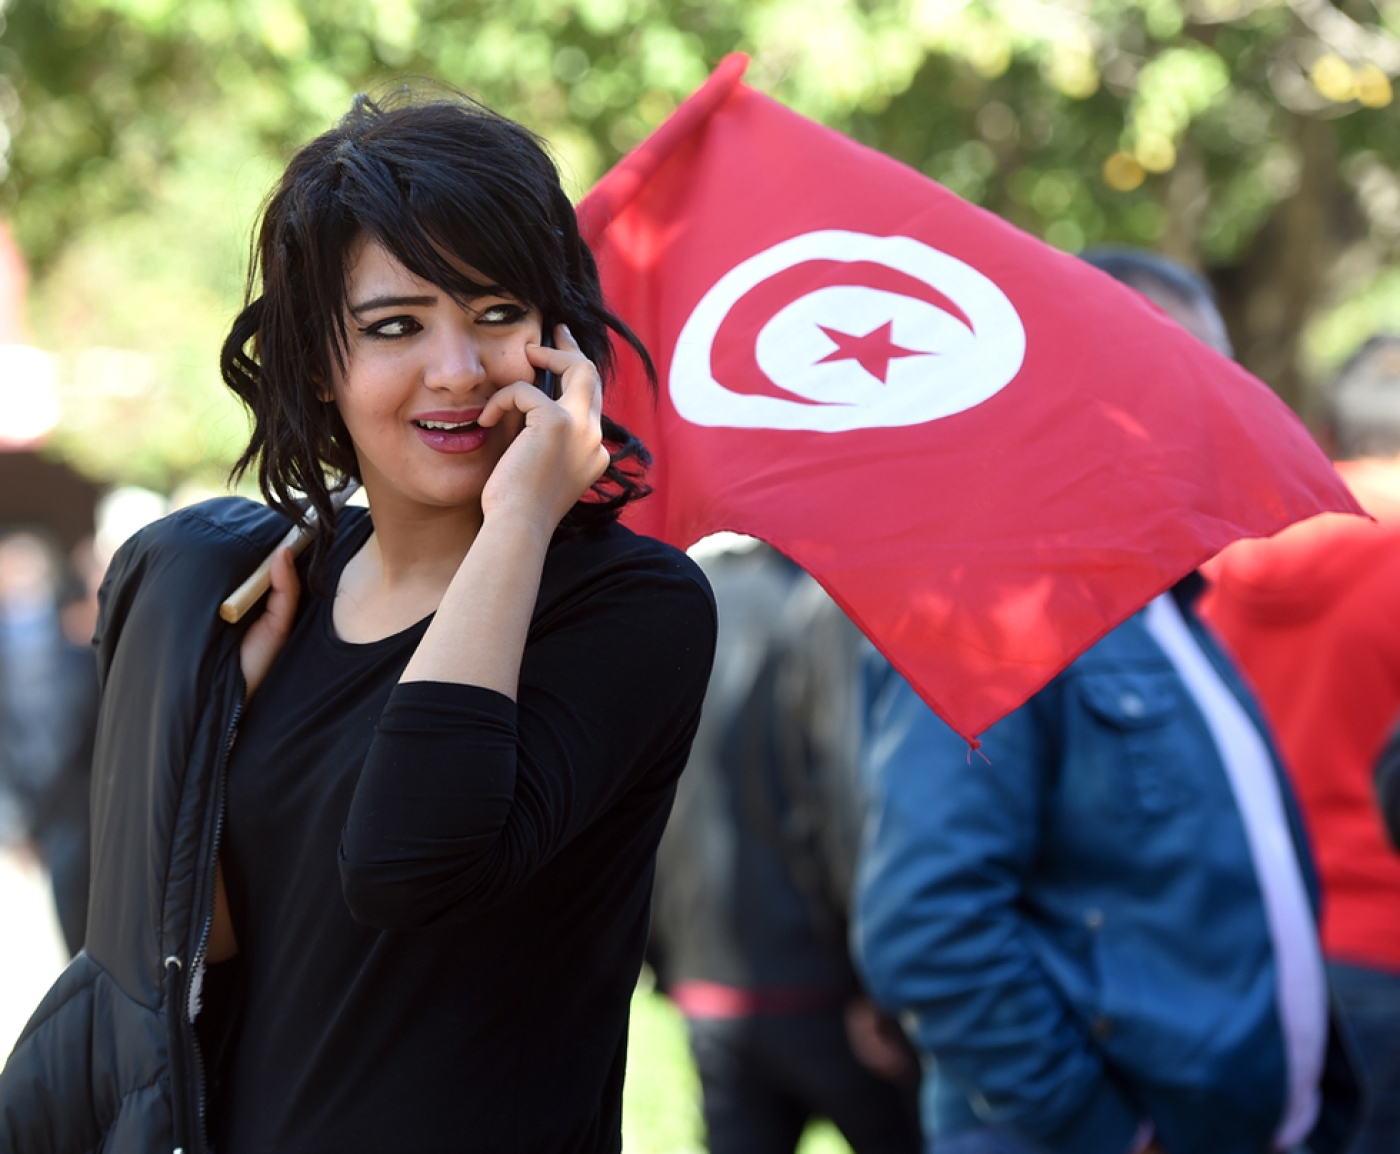 Tunisia abolishes ban on Muslim women marrying non-Muslims | Middle